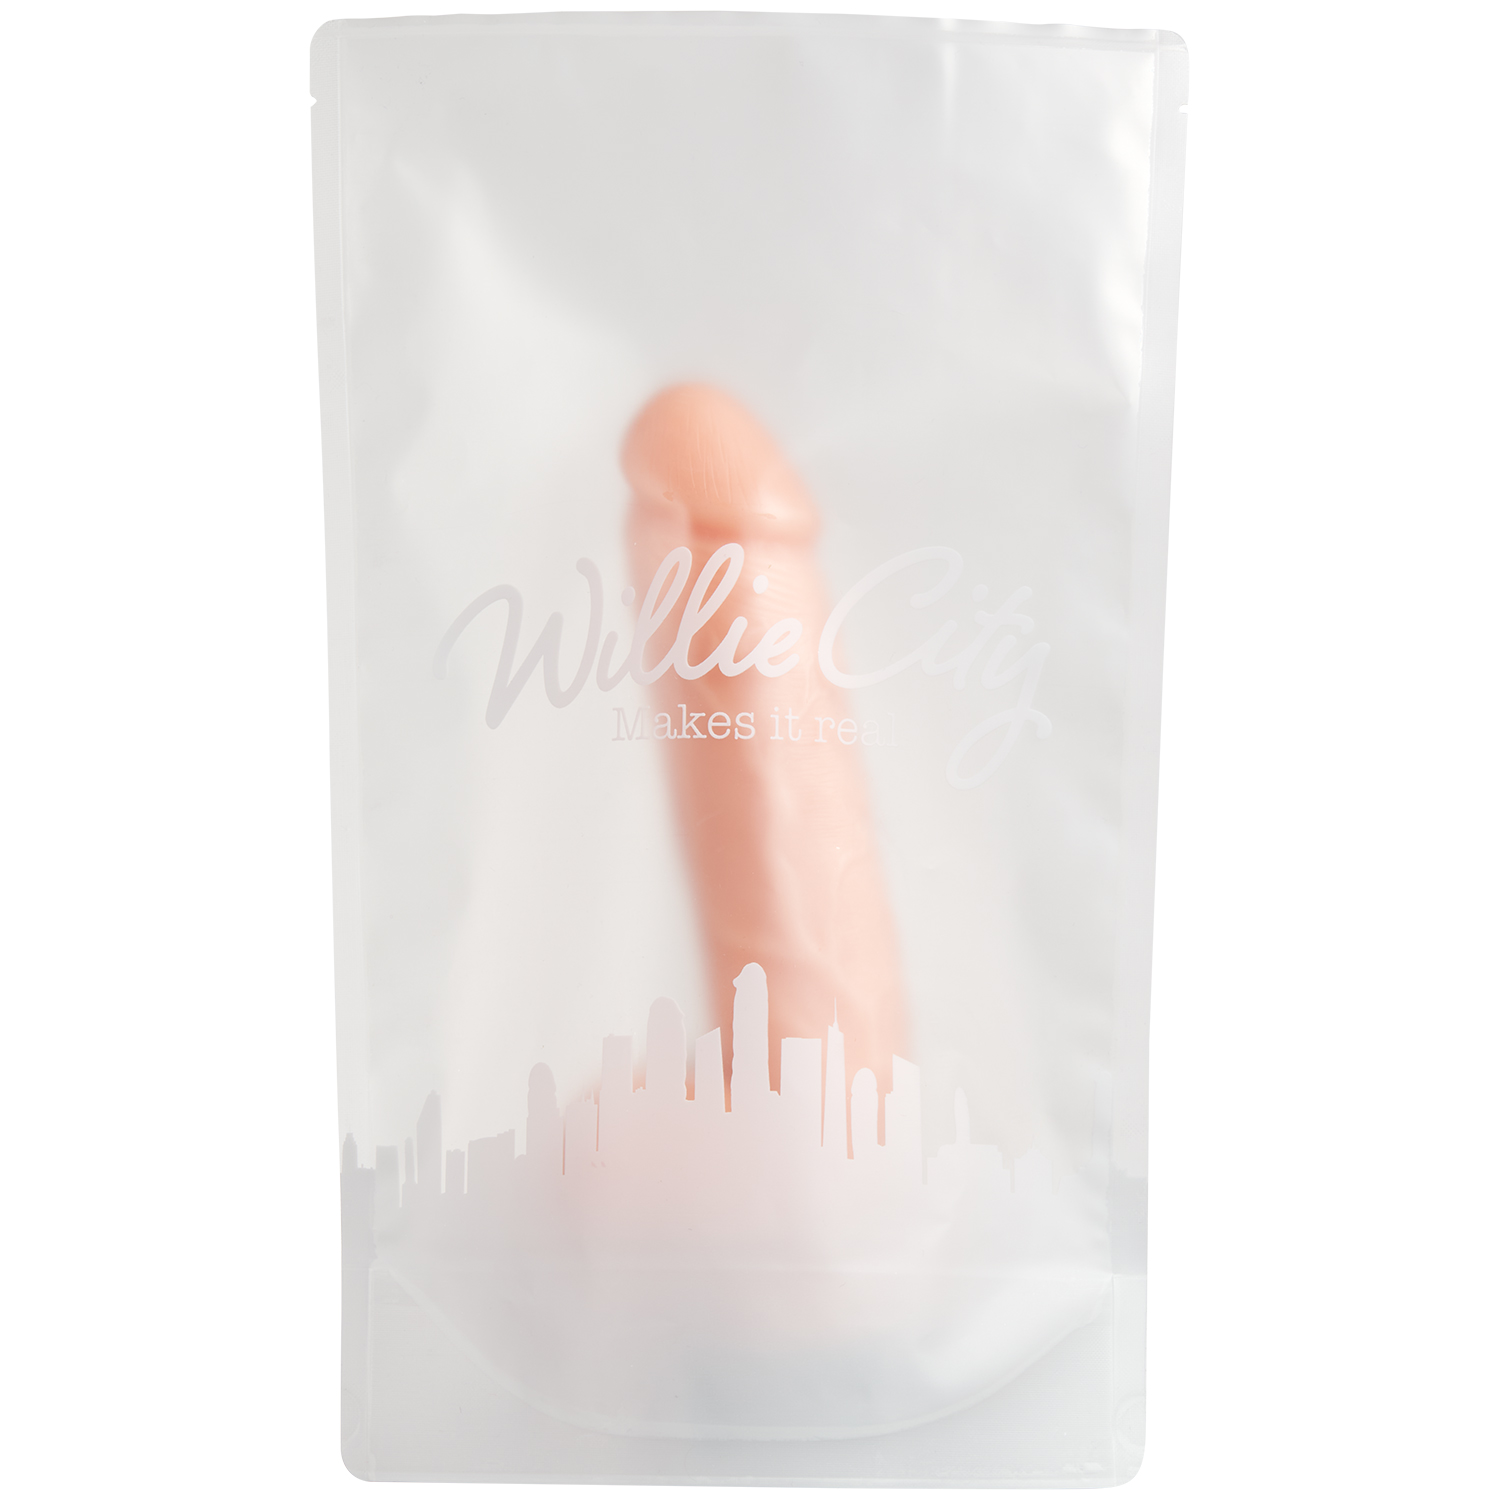 Willie City Classic Realistisk Dildo med Sugekop 22 cm   - Nude thumbnail